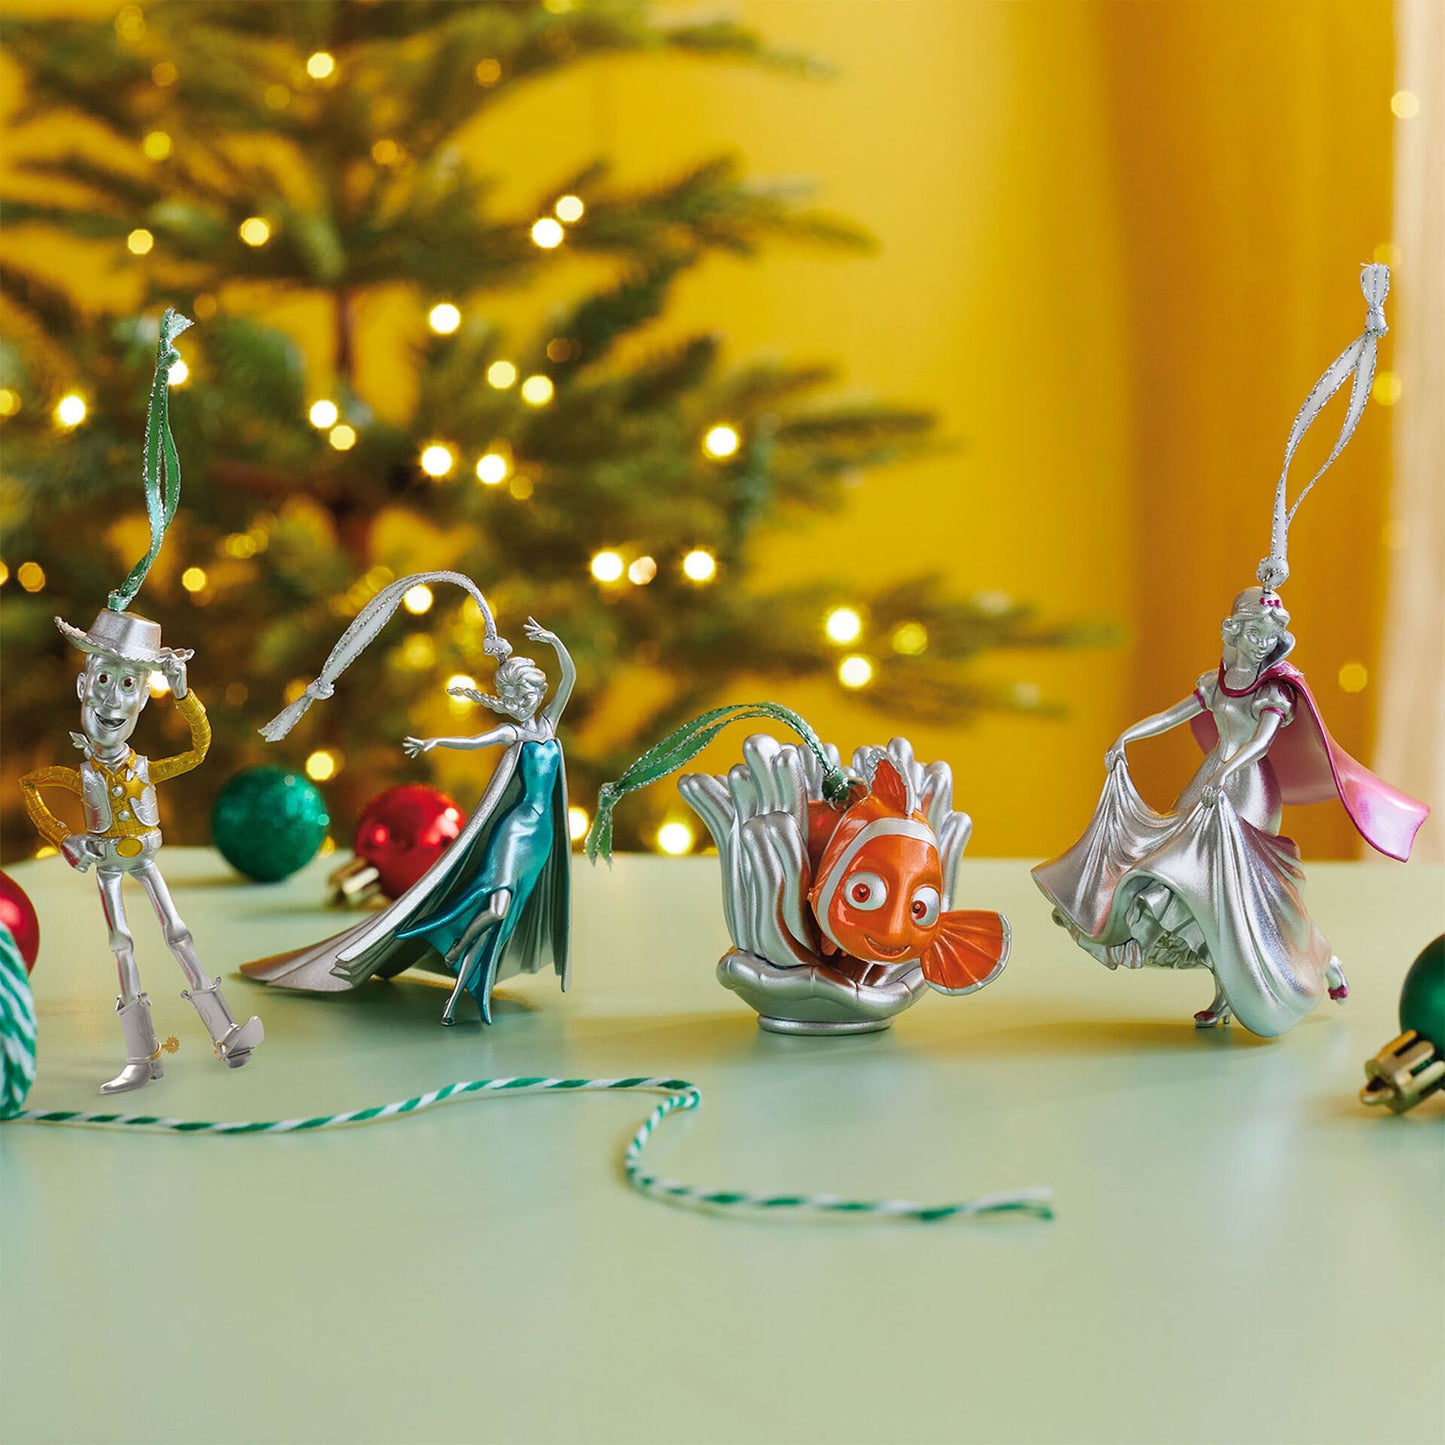 Four metallic silver Disney character Christmas ornaments. The characters from left to right are Woody, Elsa, Nemo, and Snow White.